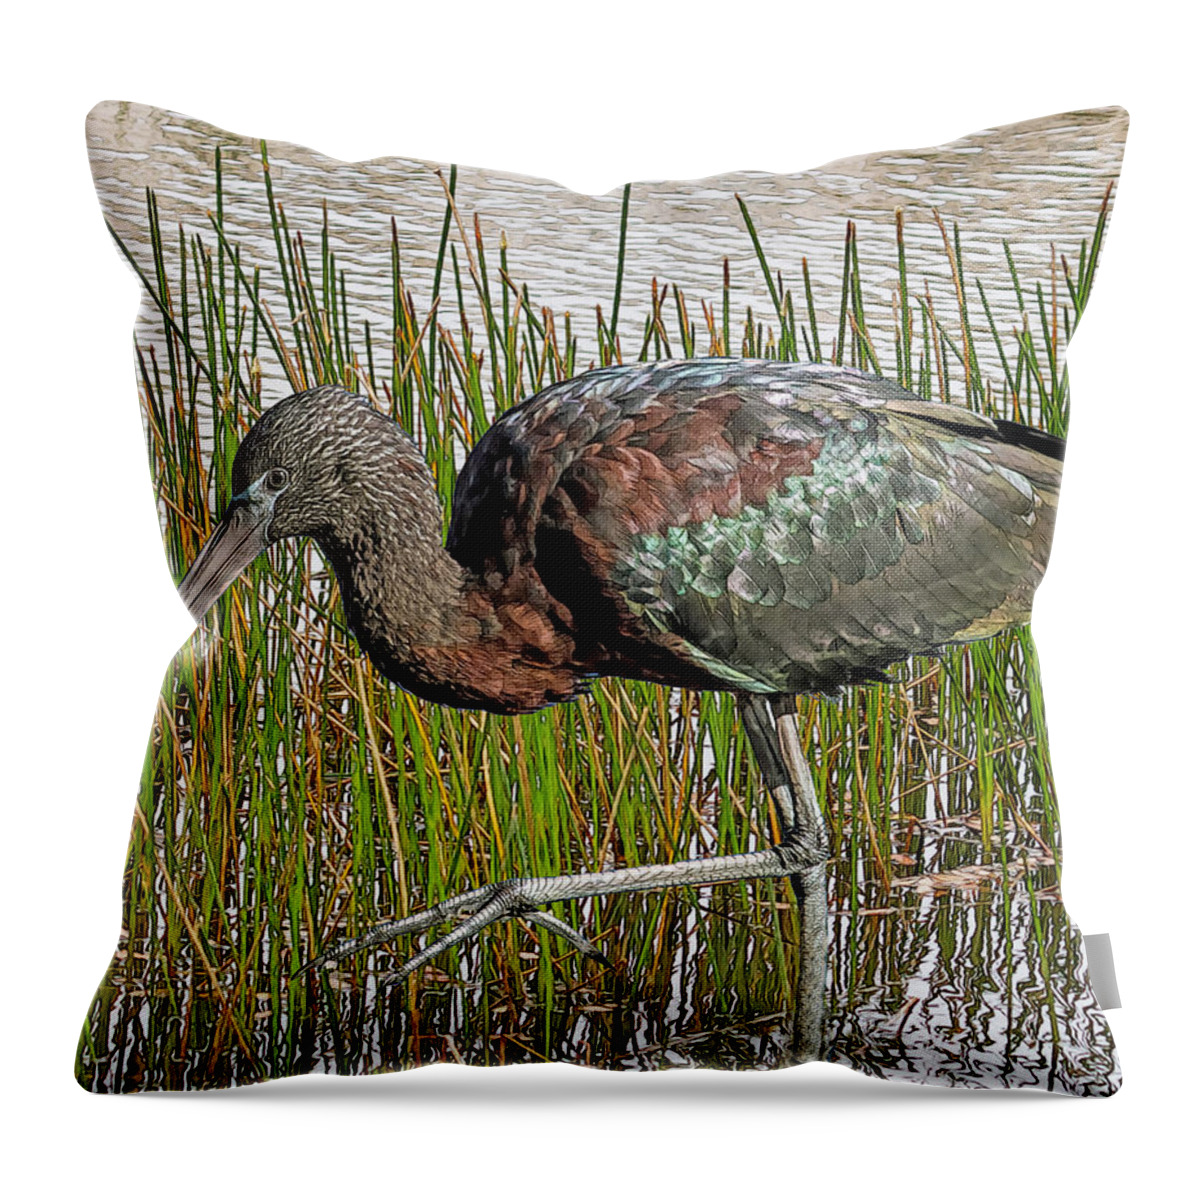 Ibis Throw Pillow featuring the digital art Glossy Ibis by Larry Linton